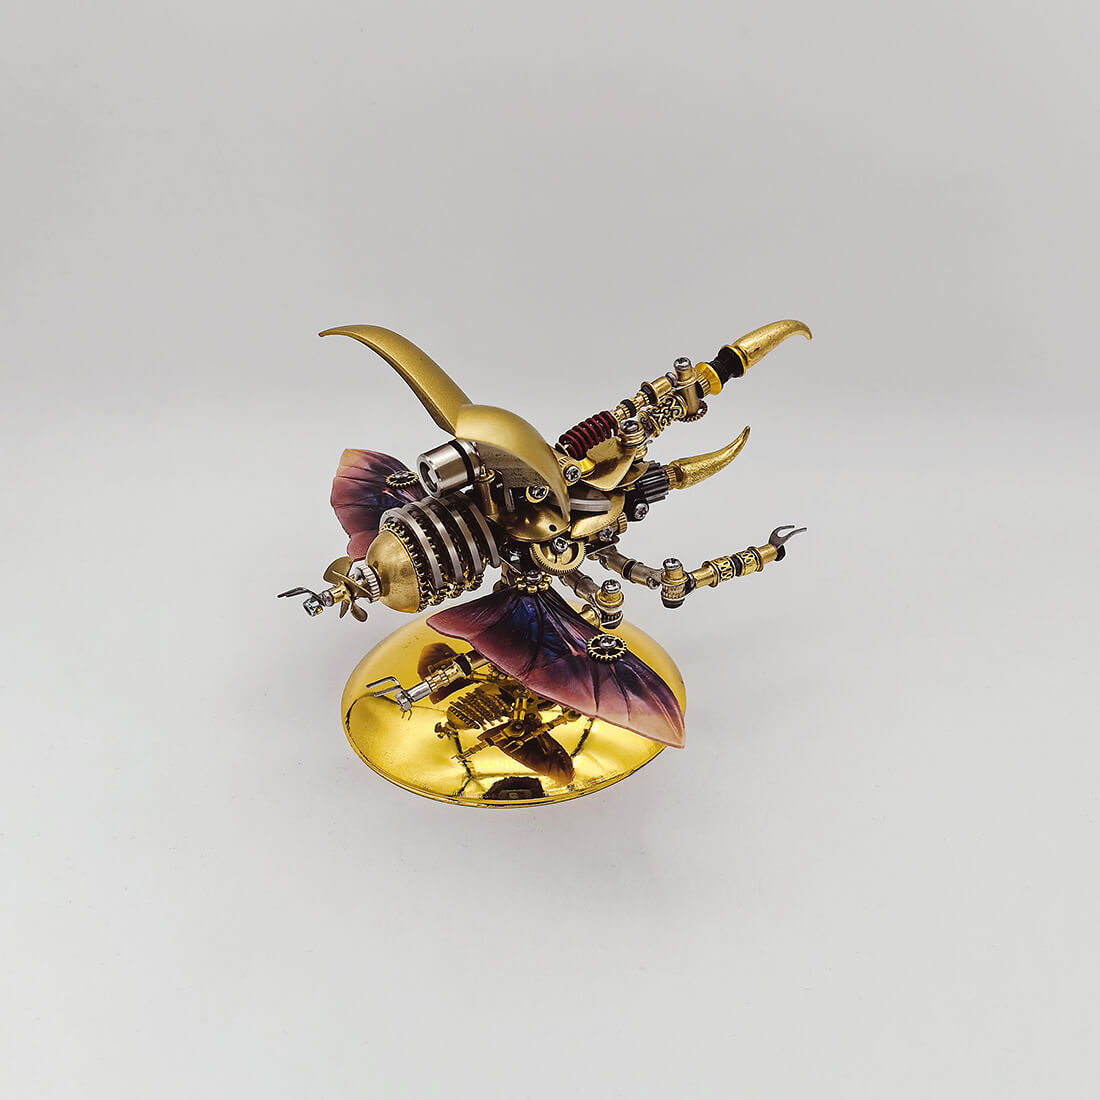 hercules-beetle-3d-diy-steampunk-insects-metal-puzzle-model-kits